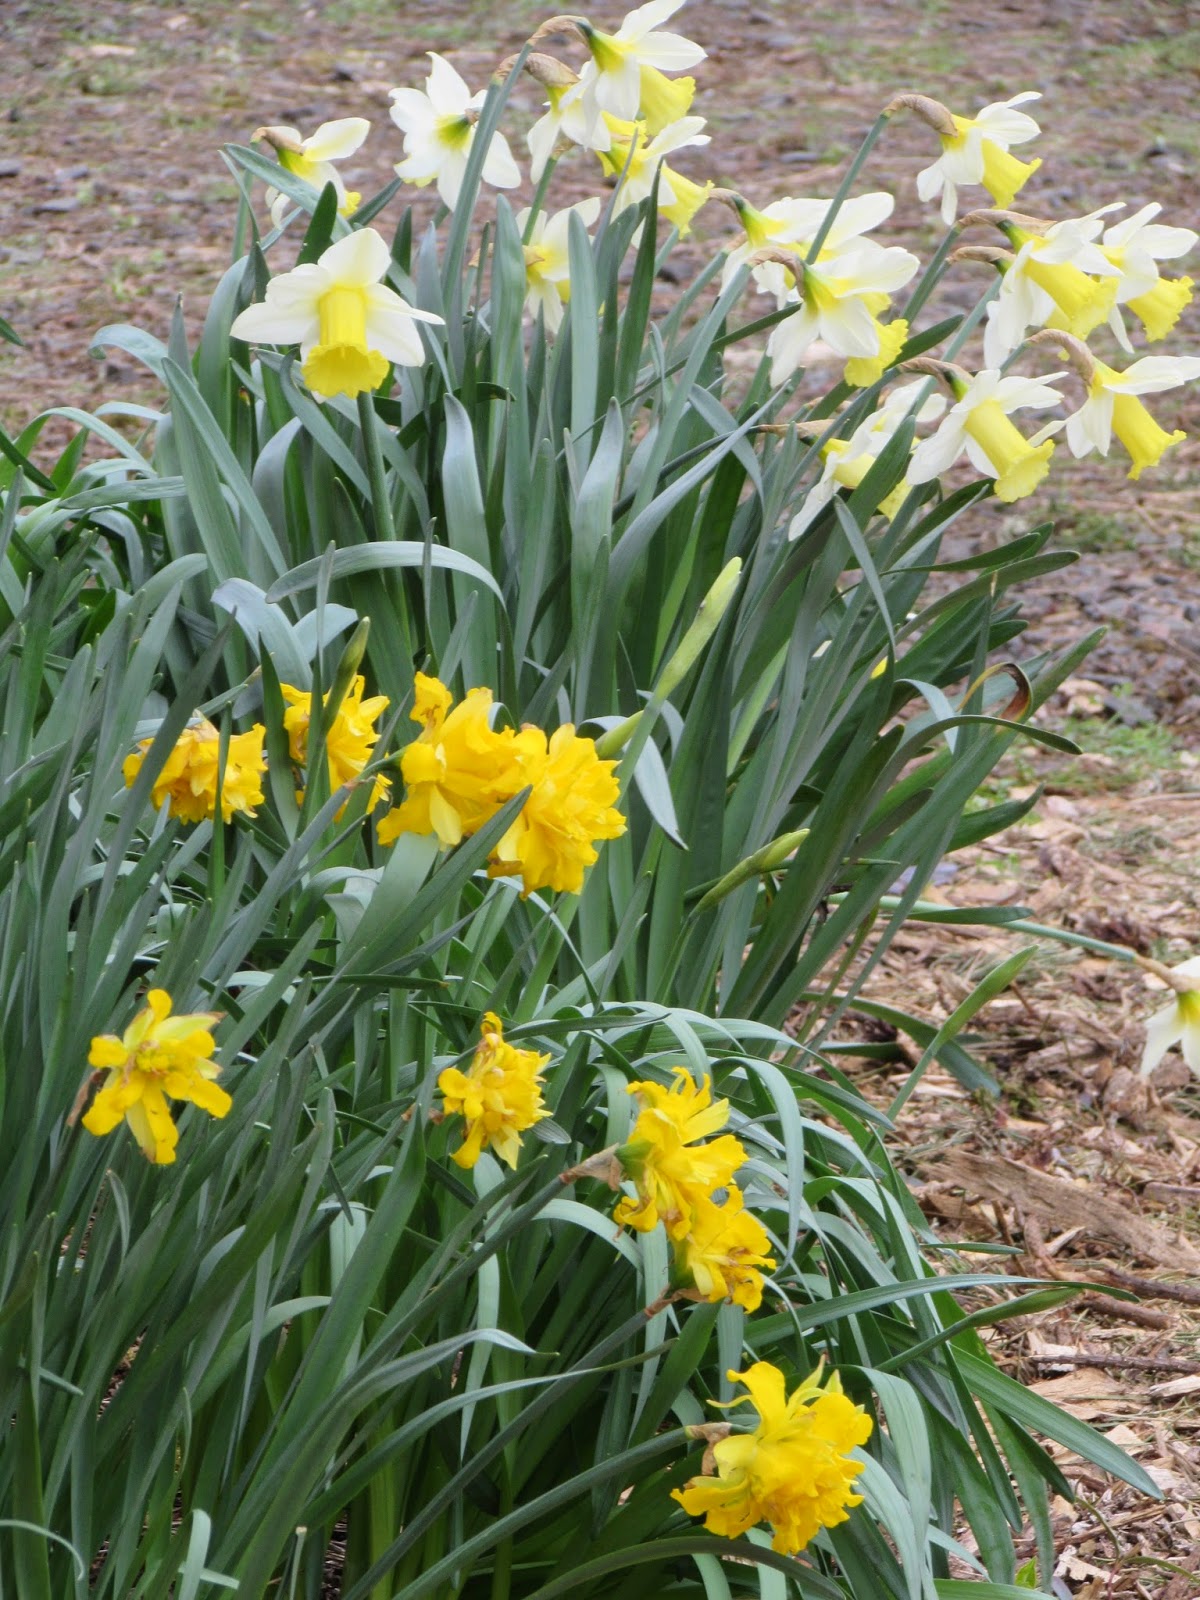 Garden Grumbles and Cross Stitch Fumbles: A Host of Golden Daffodils